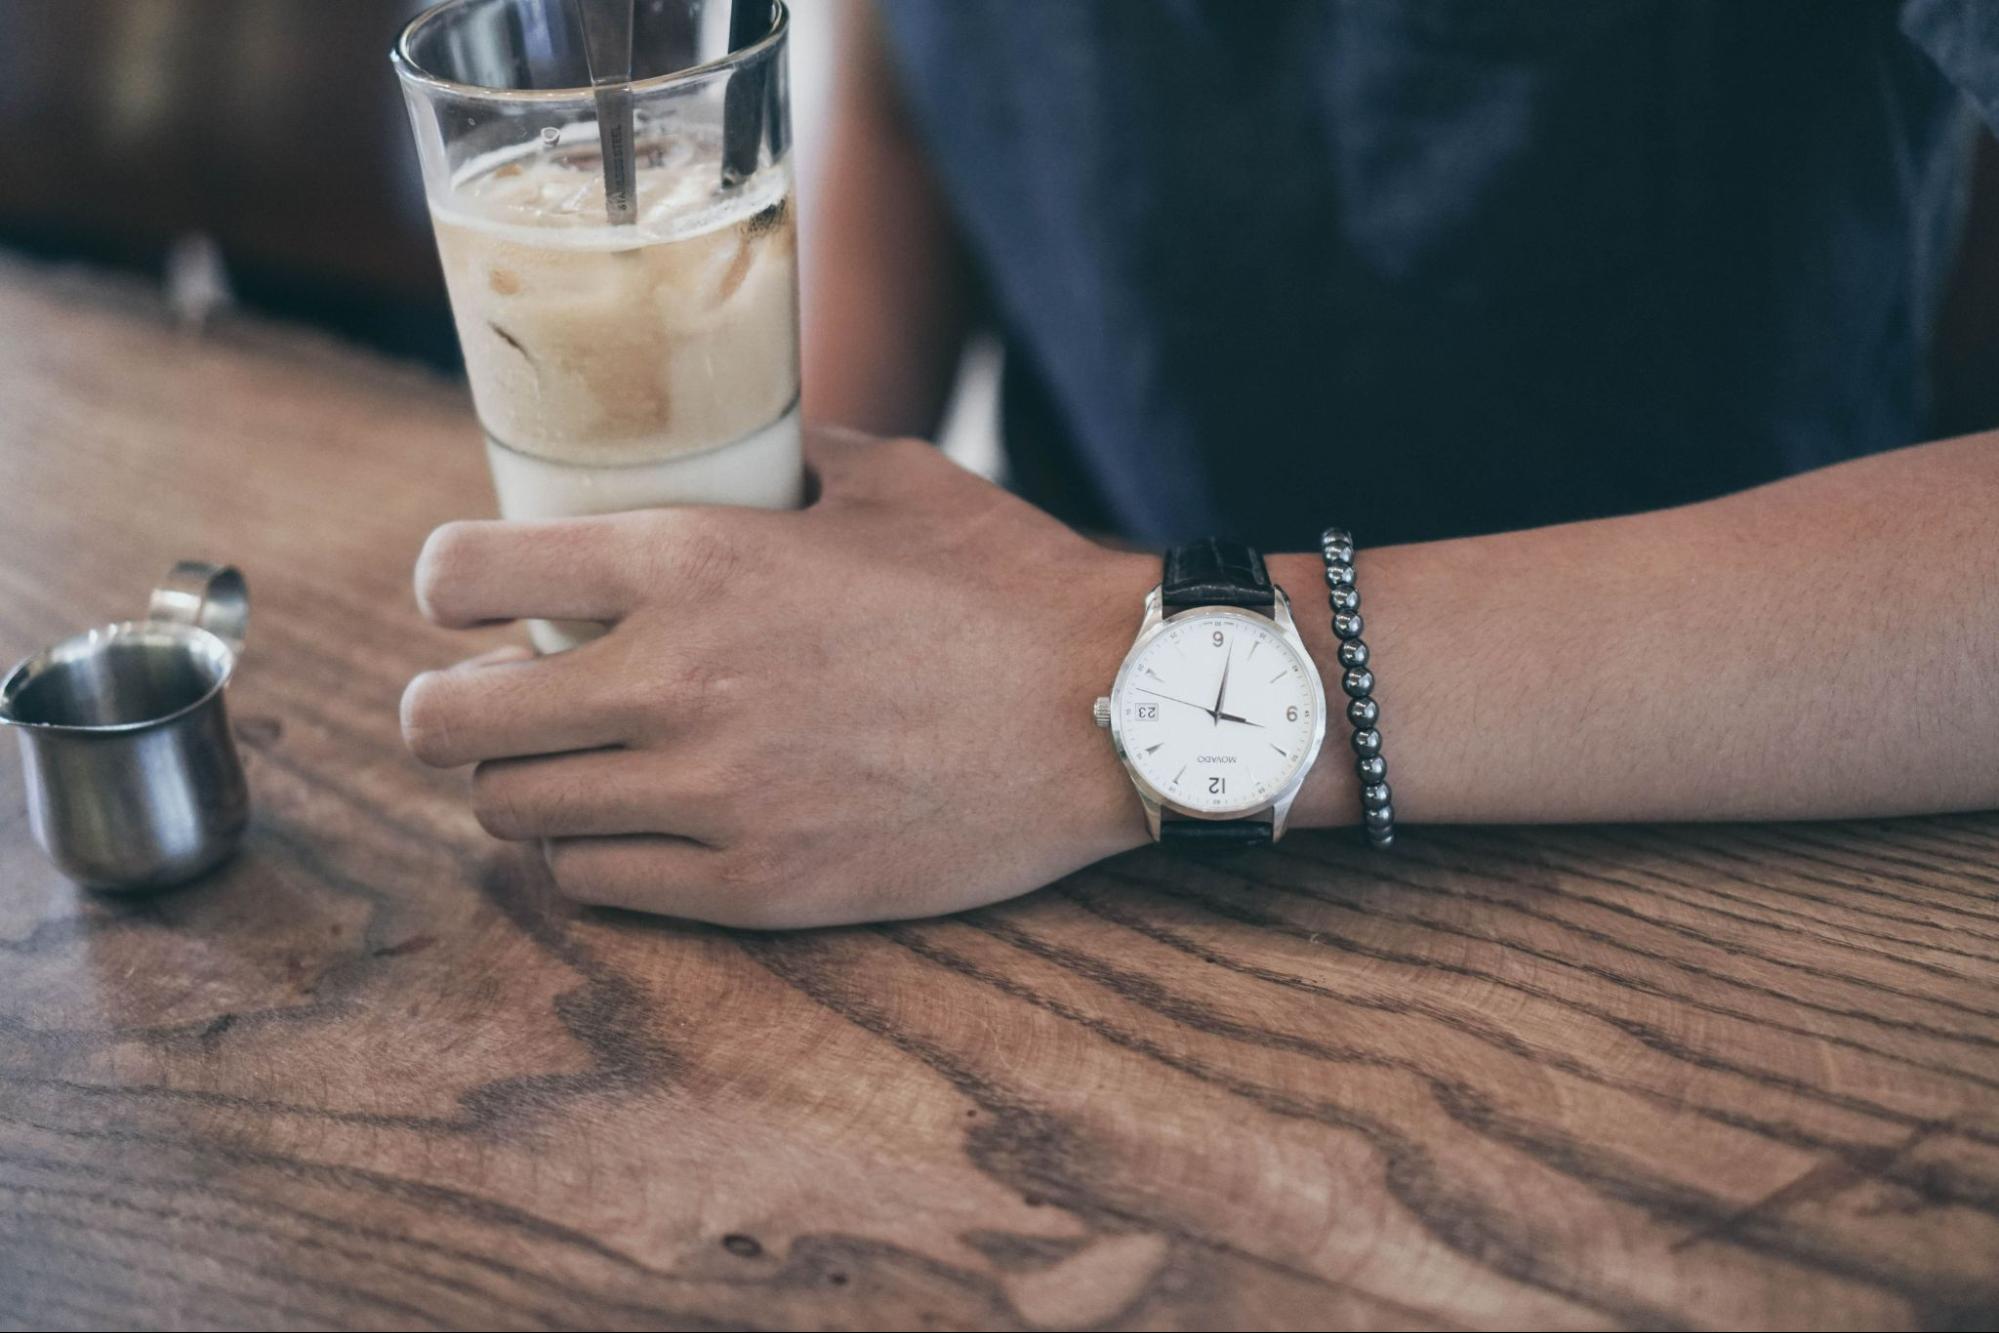 A man sipping an iced coffee wears a casual watch.